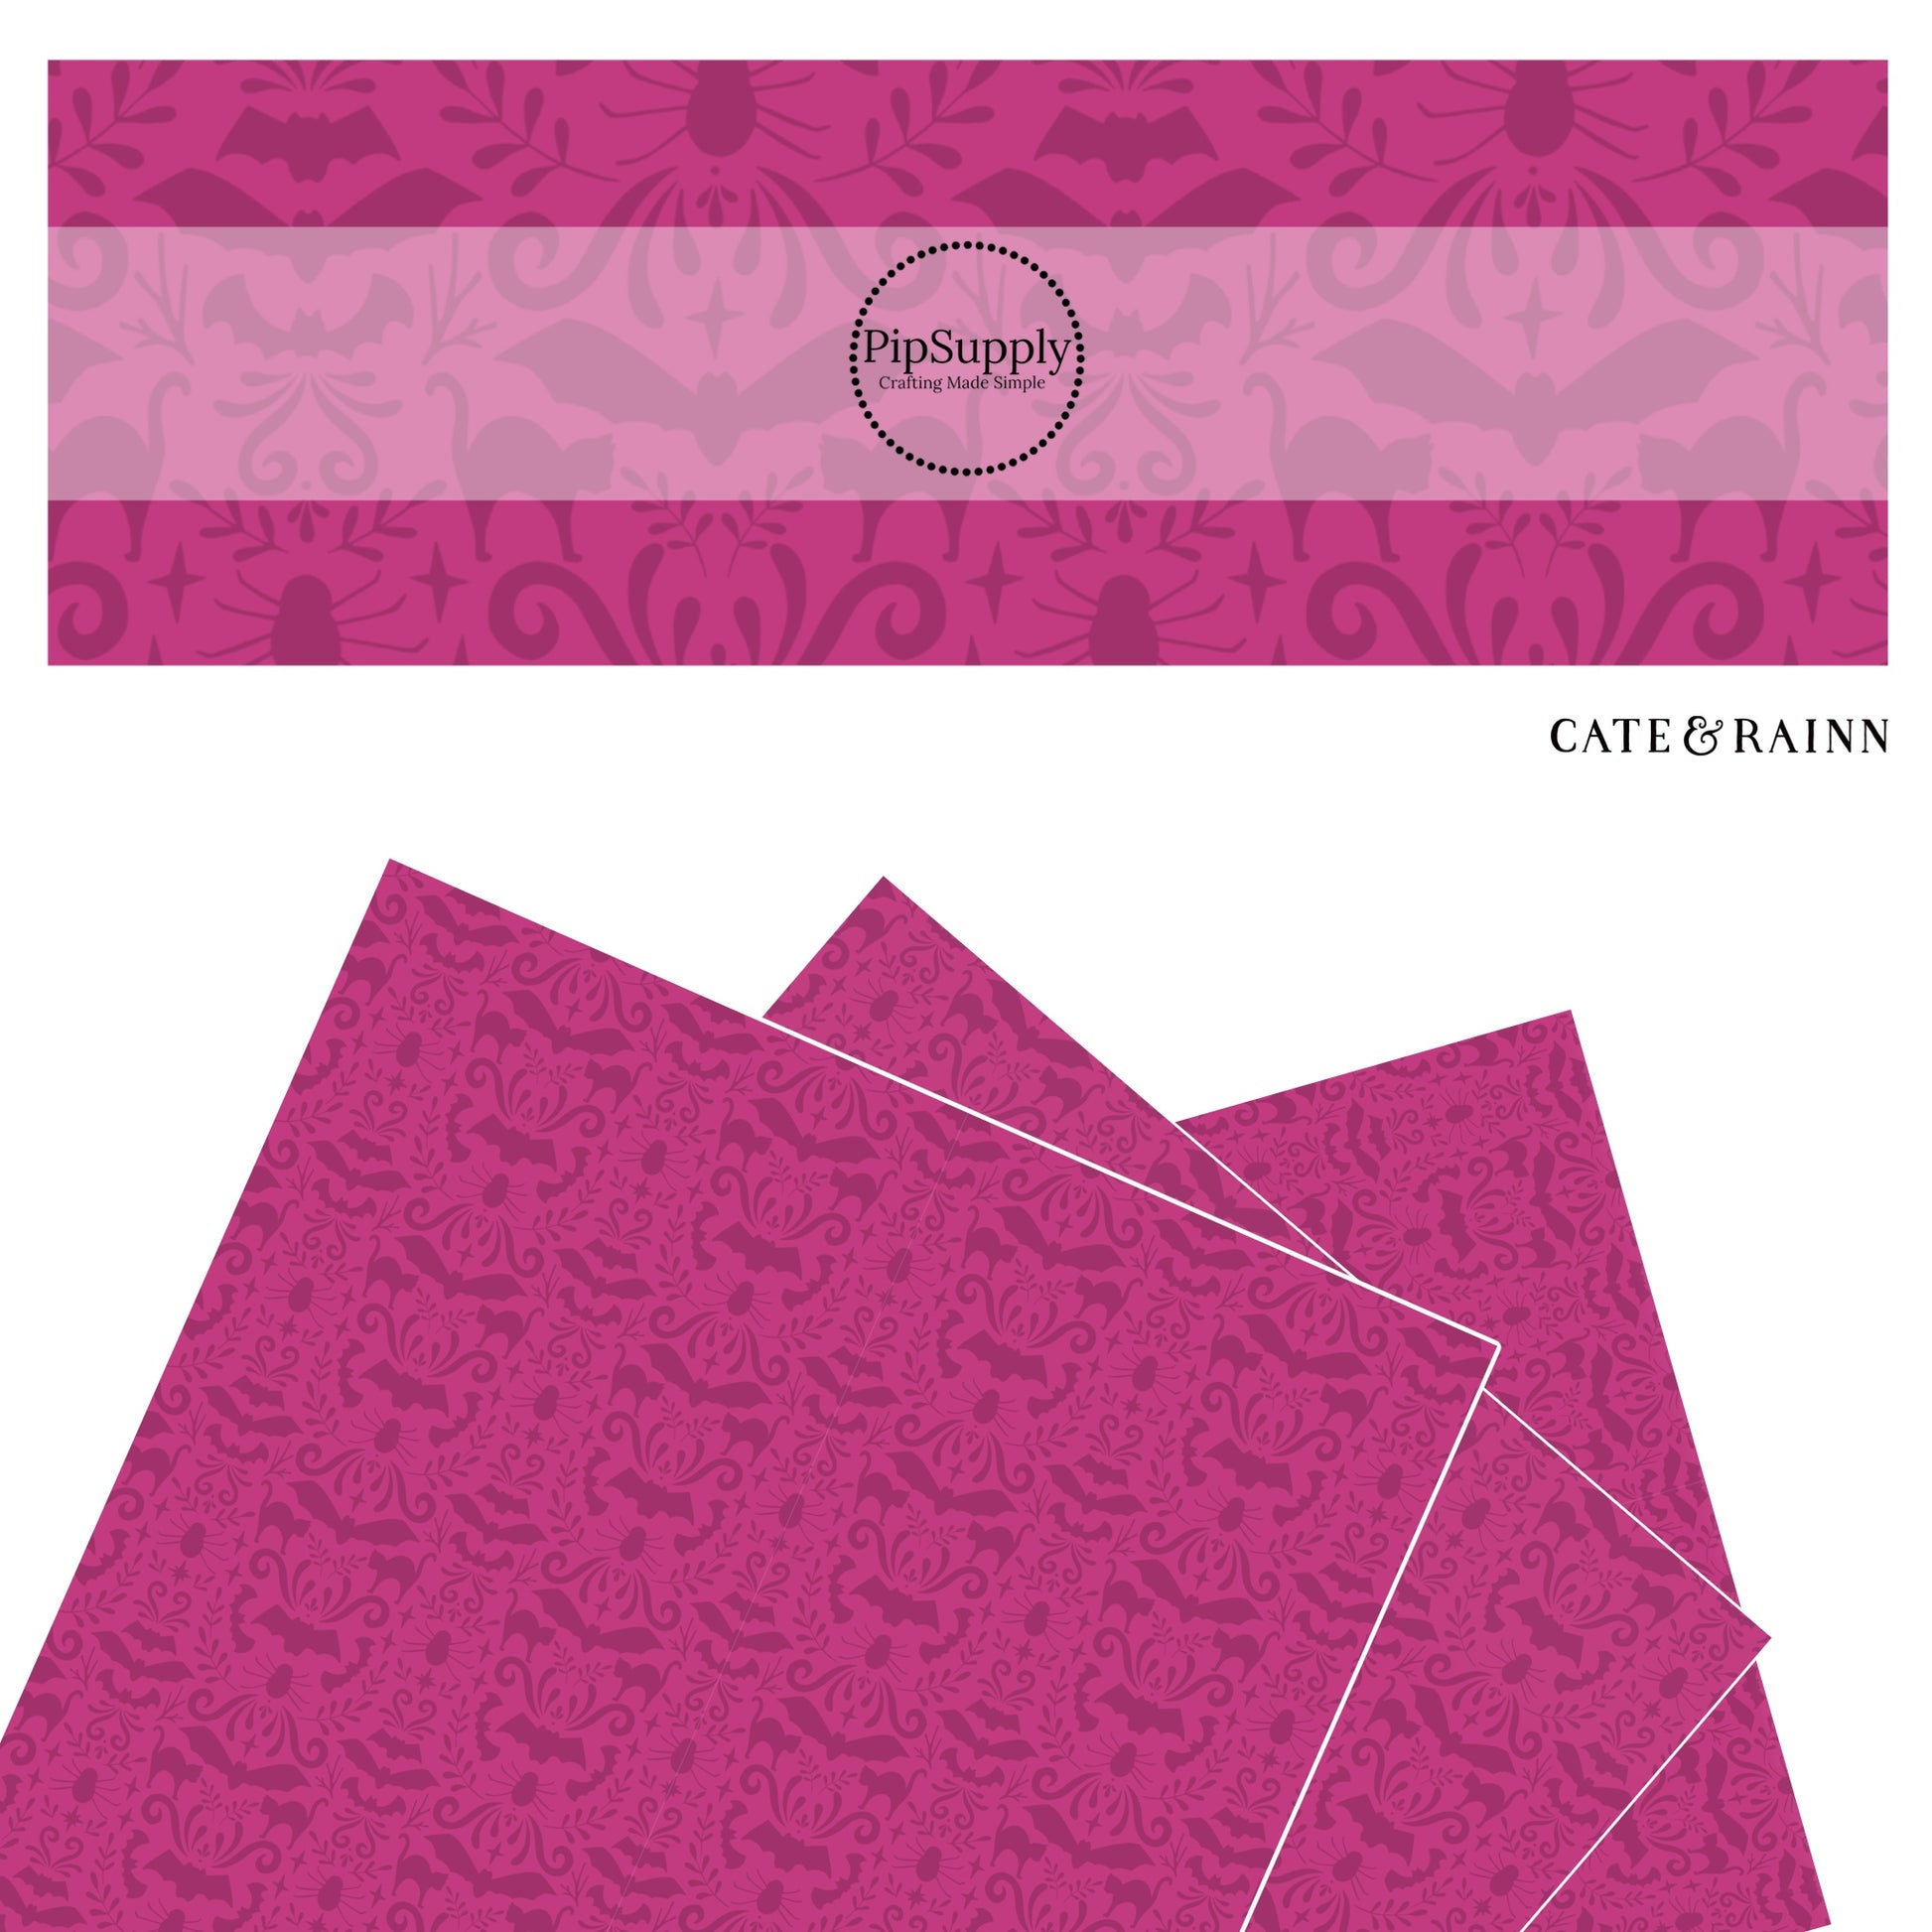 These Halloween themed magenta faux leather sheets contain the following design elements: Halloween themed pattern that includes bats and cats on dark pink. Our CPSIA compliant faux leather sheets or rolls can be used for all types of crafting projects.